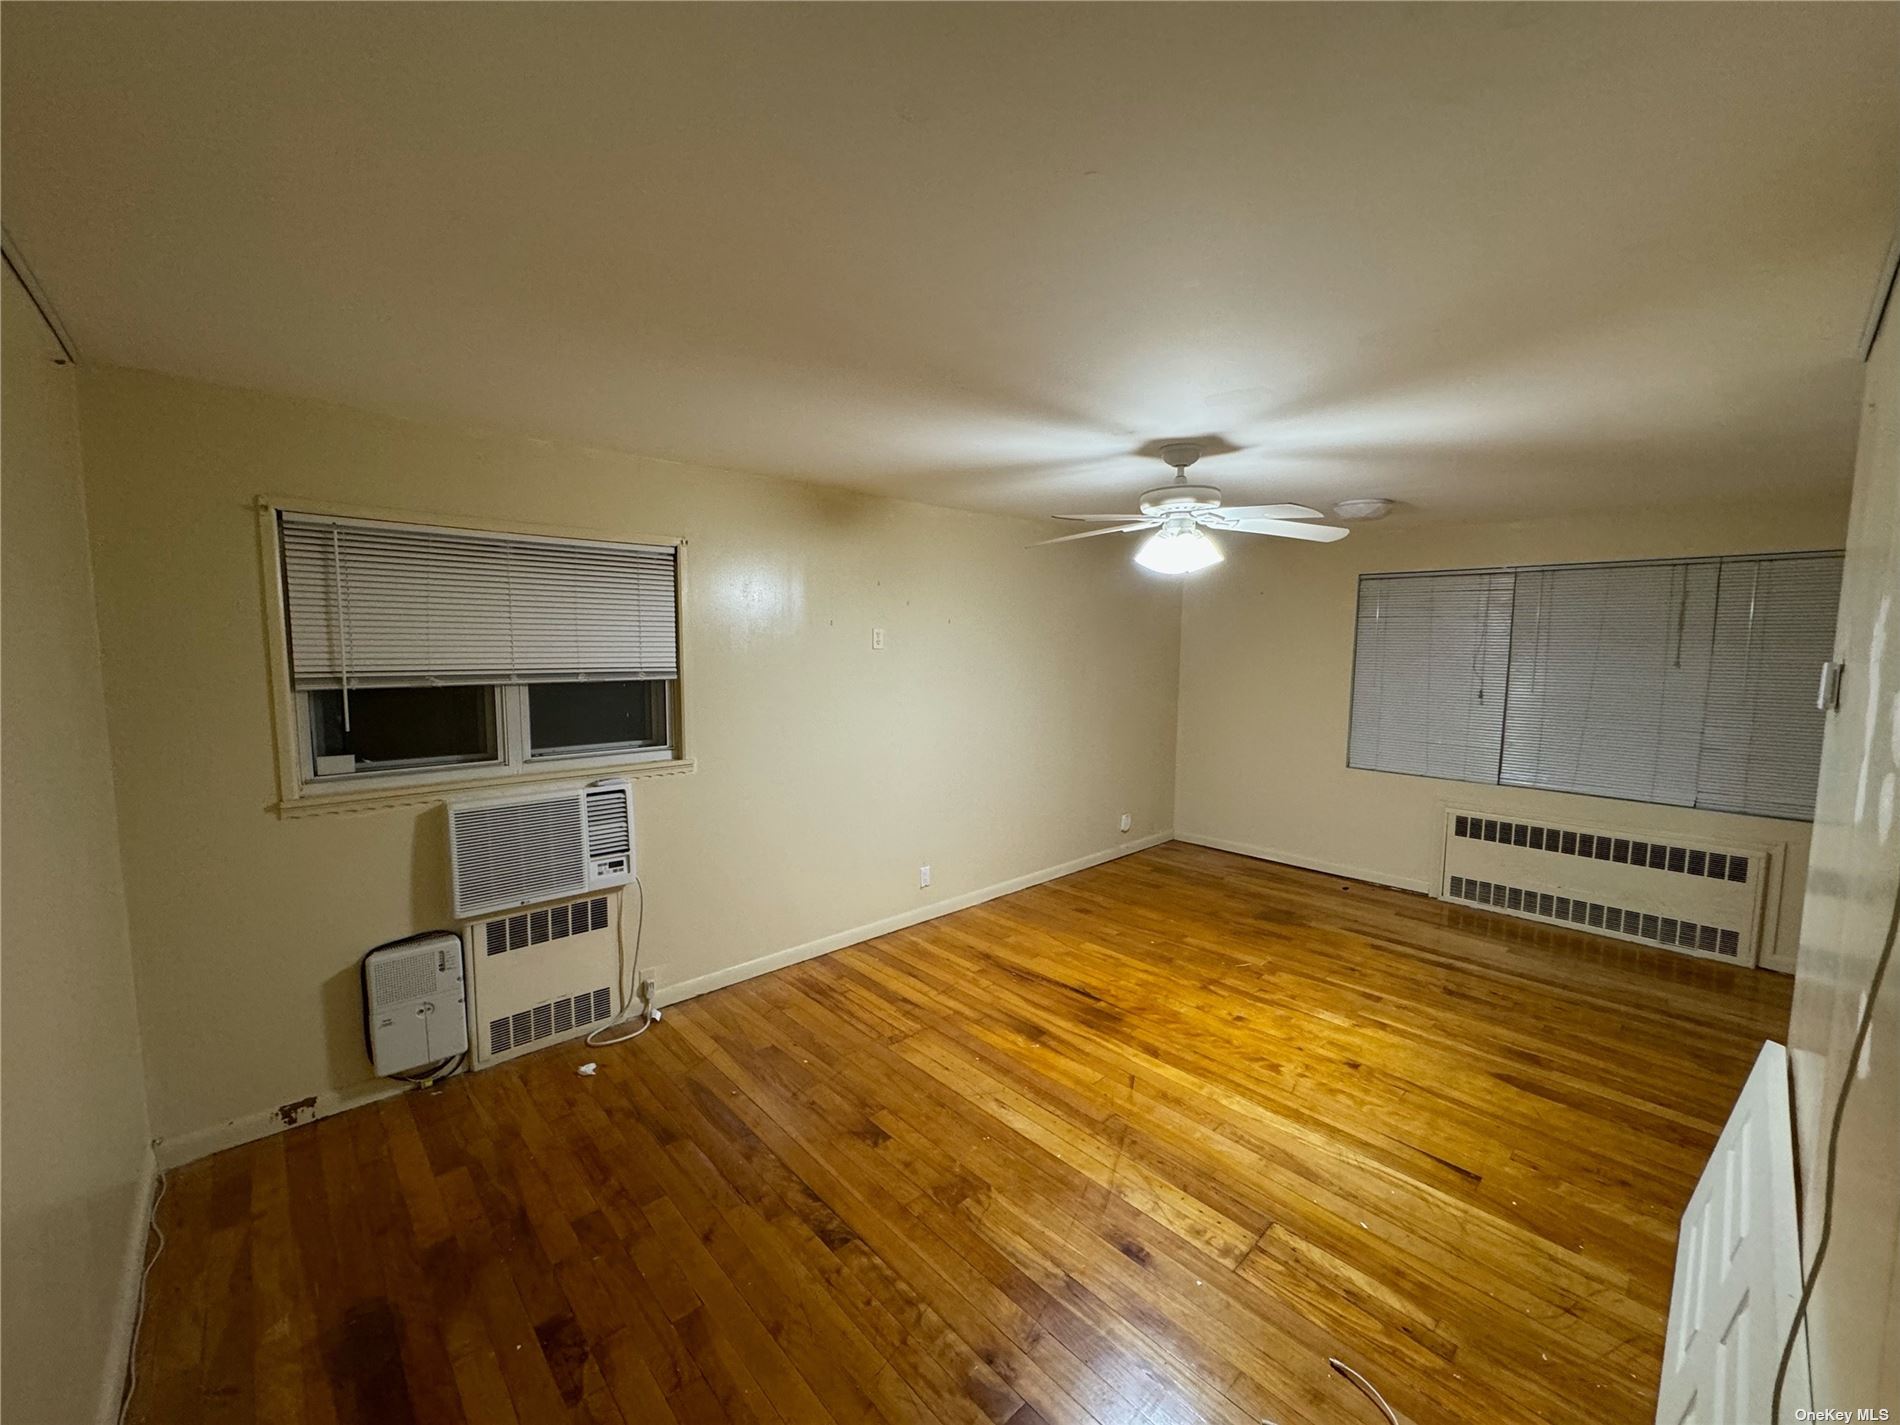 Apartment in Bellerose - 241st  Queens, NY 11426